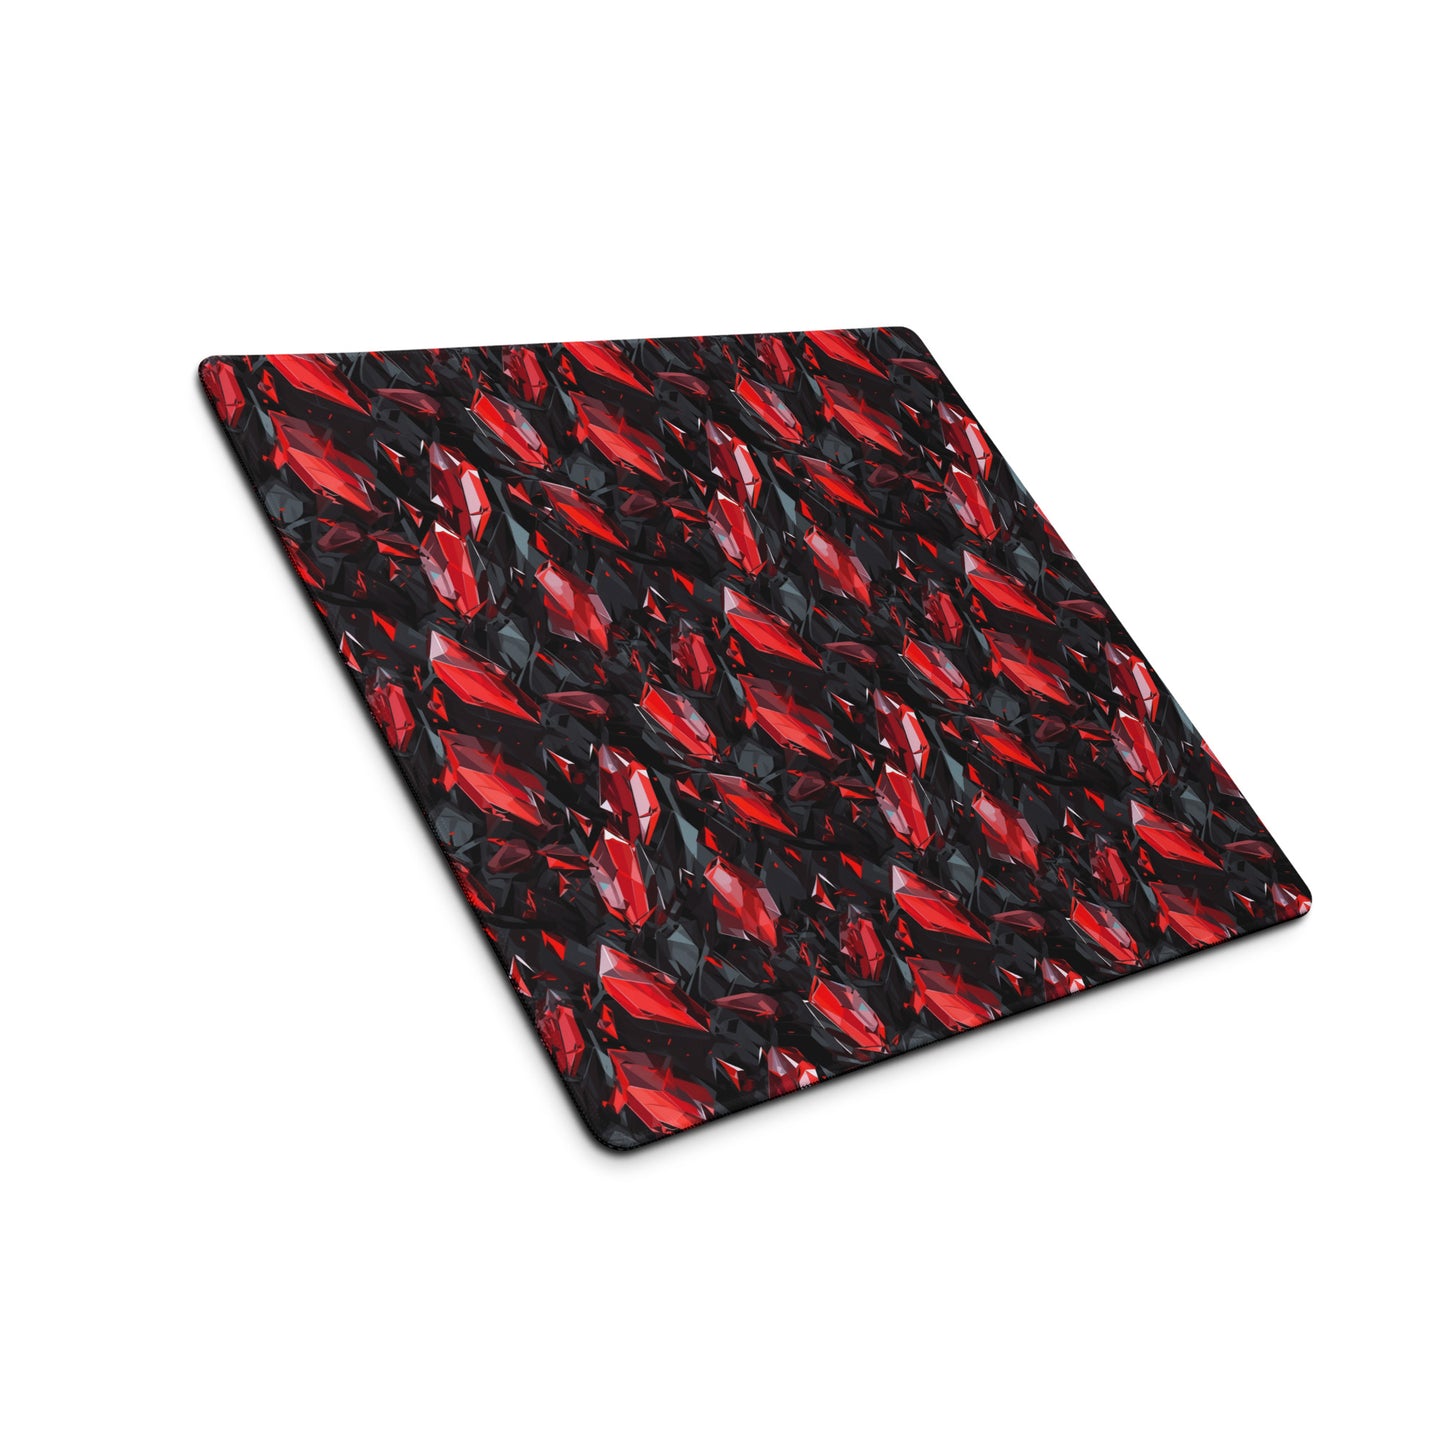 An 18" x 16" gaming desk pad with black and red crystals sitting at an angle.